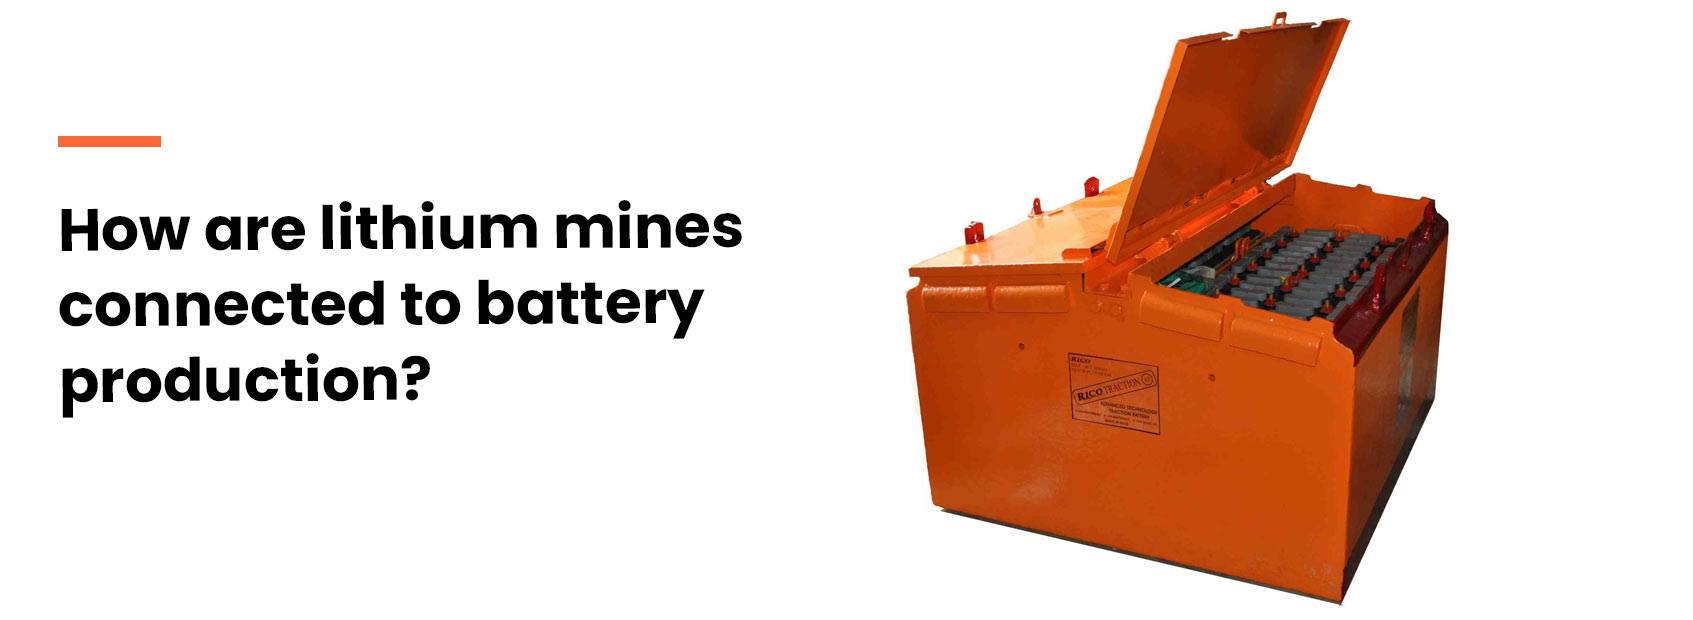 How are lithium mines connected to battery production?